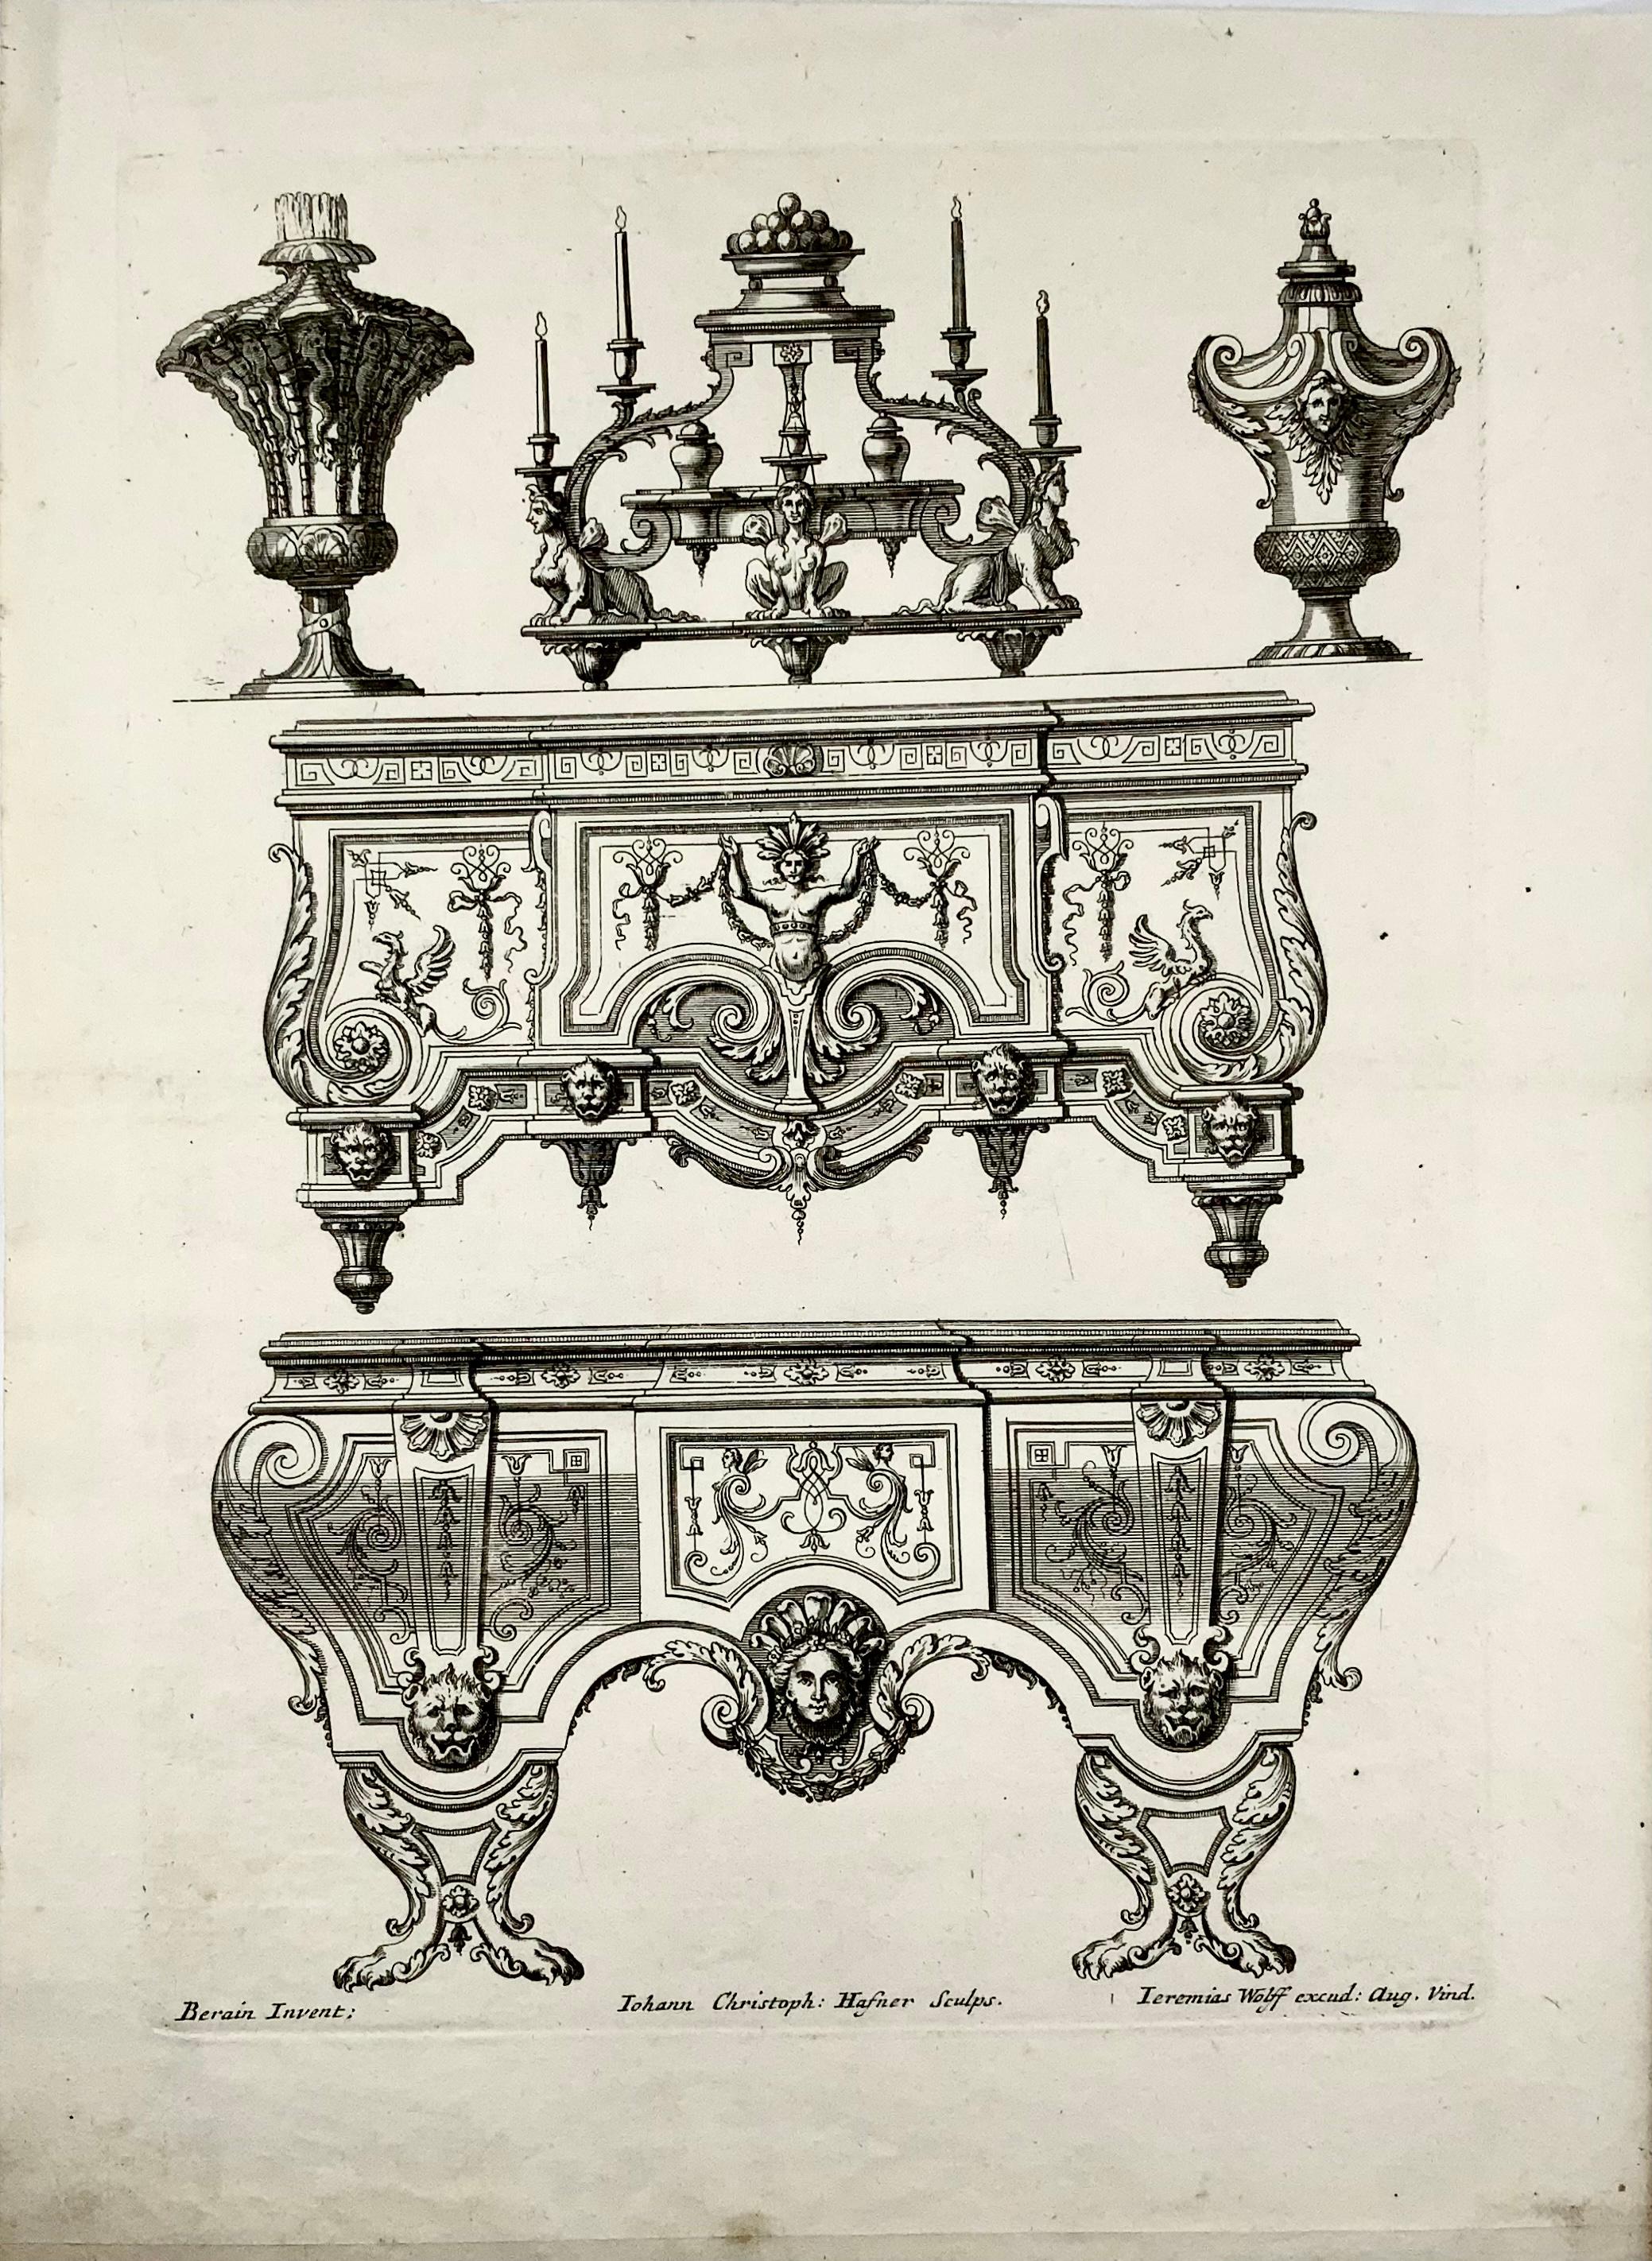 Jean Bérain, French, 1640–1711

Unnumbered plate by BÉRAIN of Commodes. 

38.5 x 28.7 cm

Engraved by Johann Christoph Hafner (1668-1754) [after Bérain], signed Iohann Christoph Haffner sculpsit.

Published in Augsburg c 1711

A collection